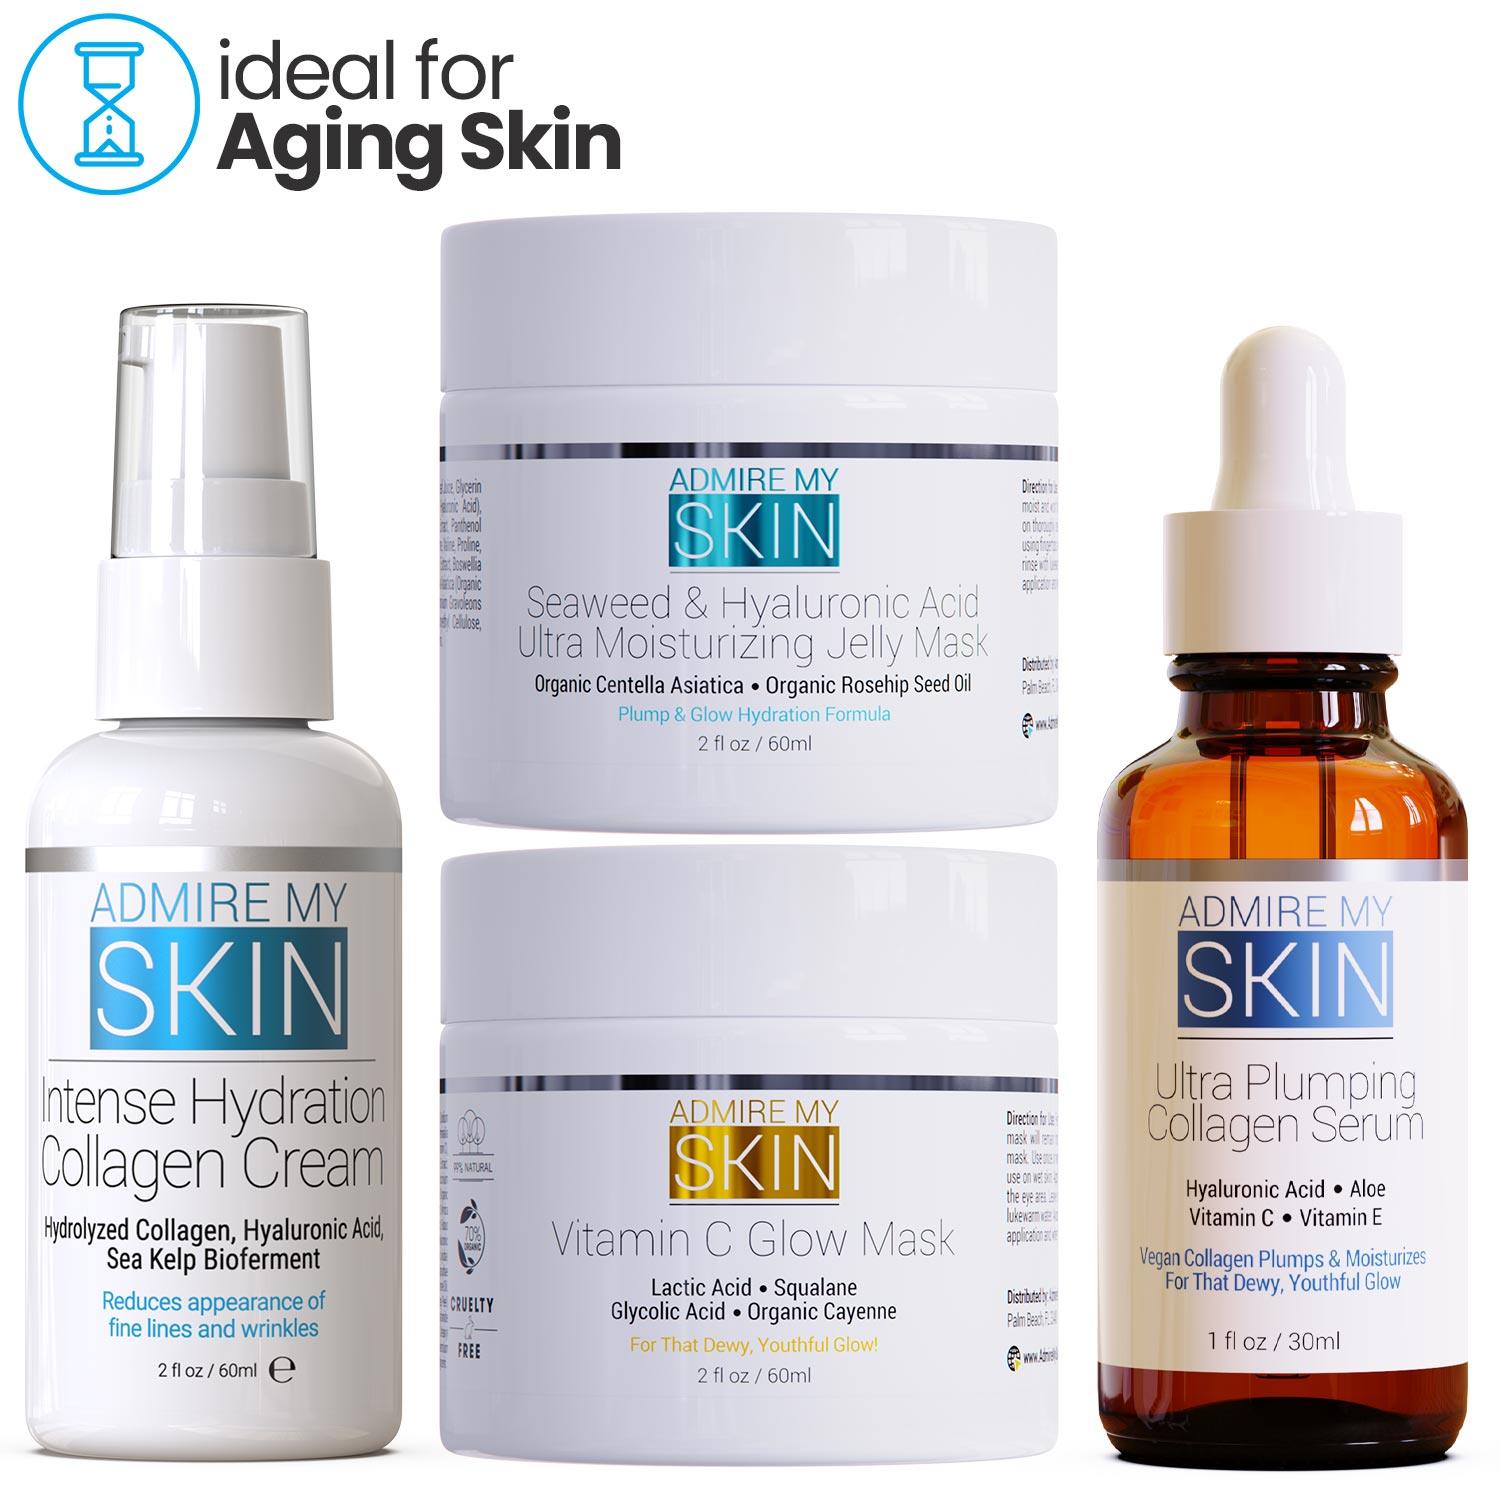 Image of Anti Aging Cream, Mask & Serum For Youthful Glow— Skin Care Routine for Aging Skin